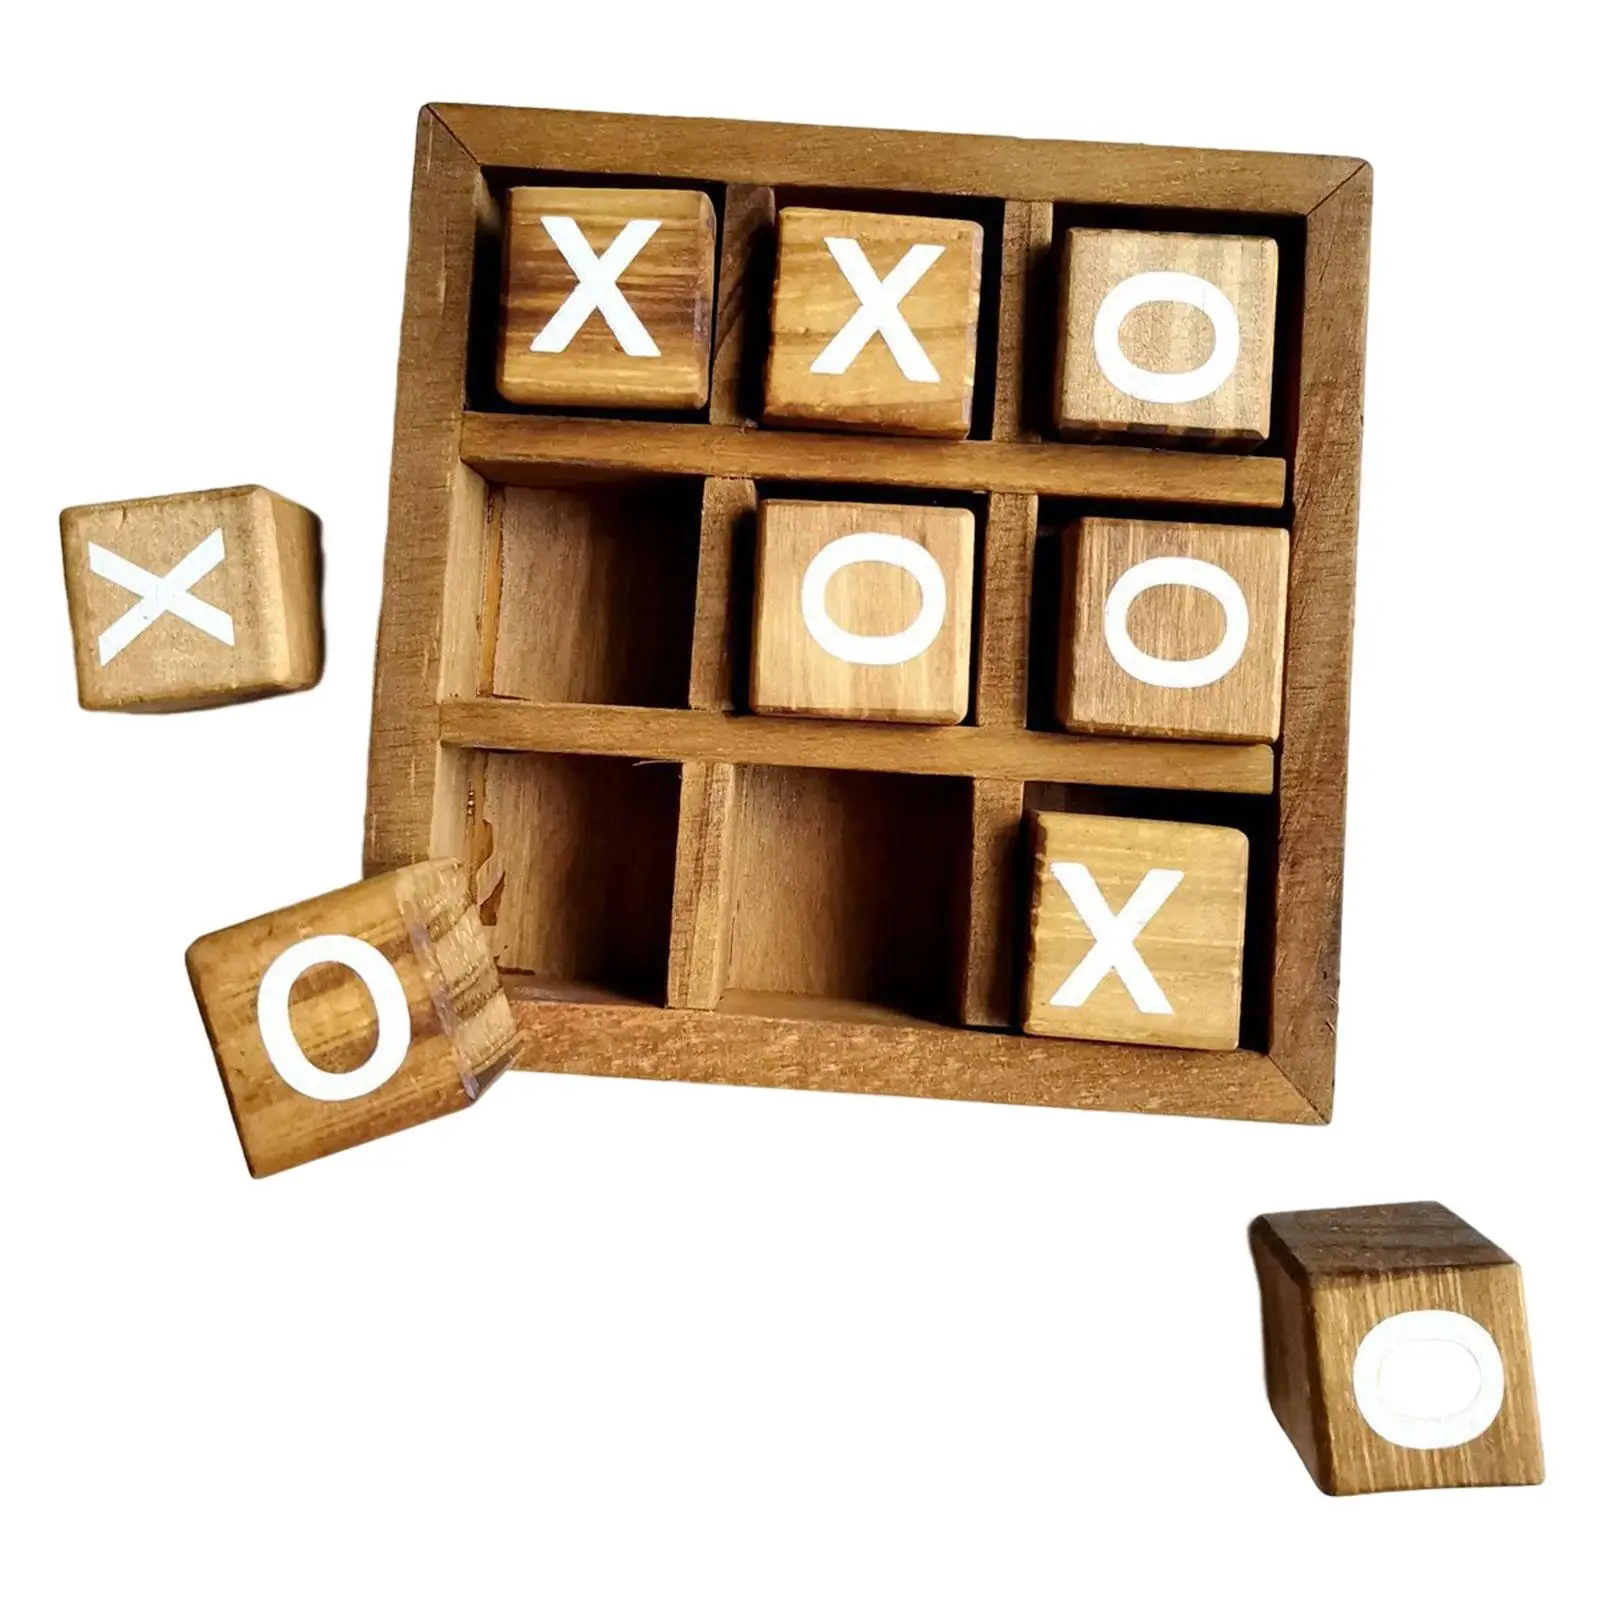 Wooden Tic TAC Toe Game Strategy Board Games Party Favor Fun Indoor Brain Teaser Travel for Decor